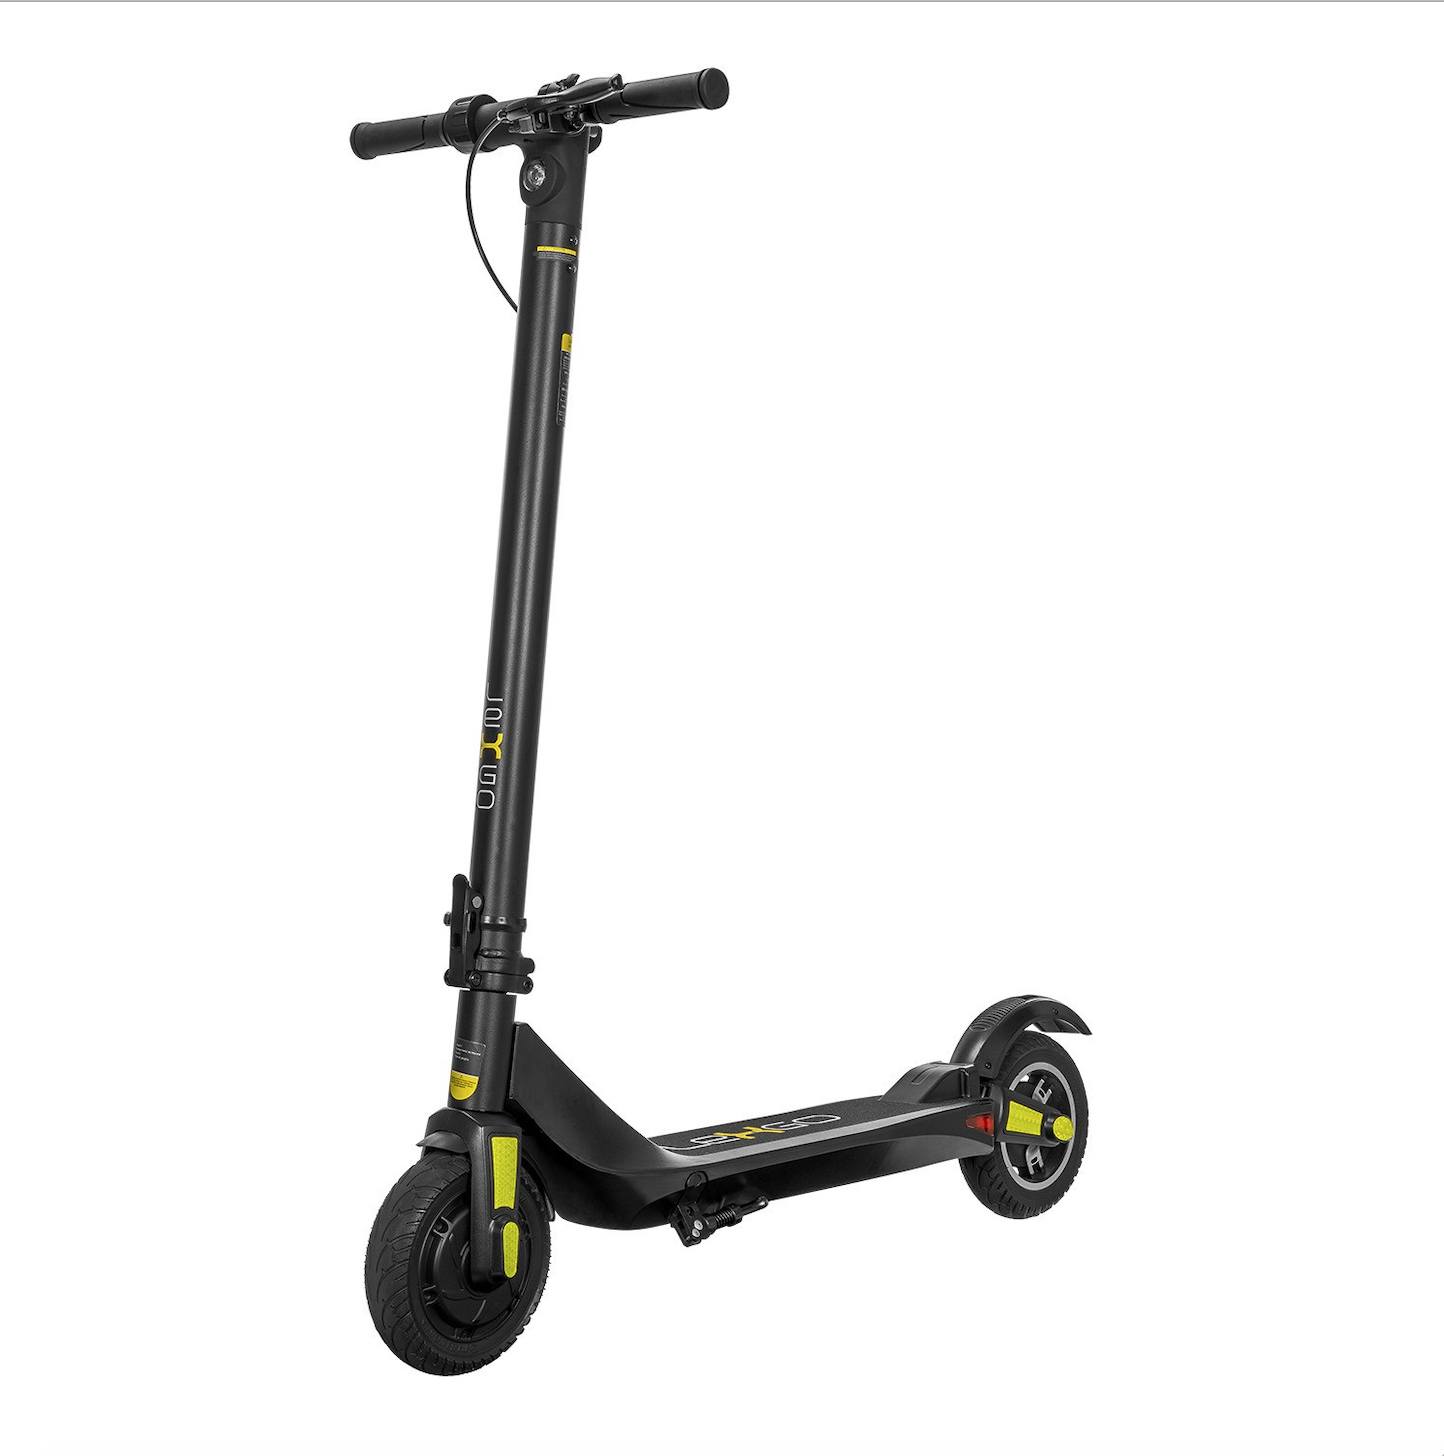 A black e-scooter against a white background.